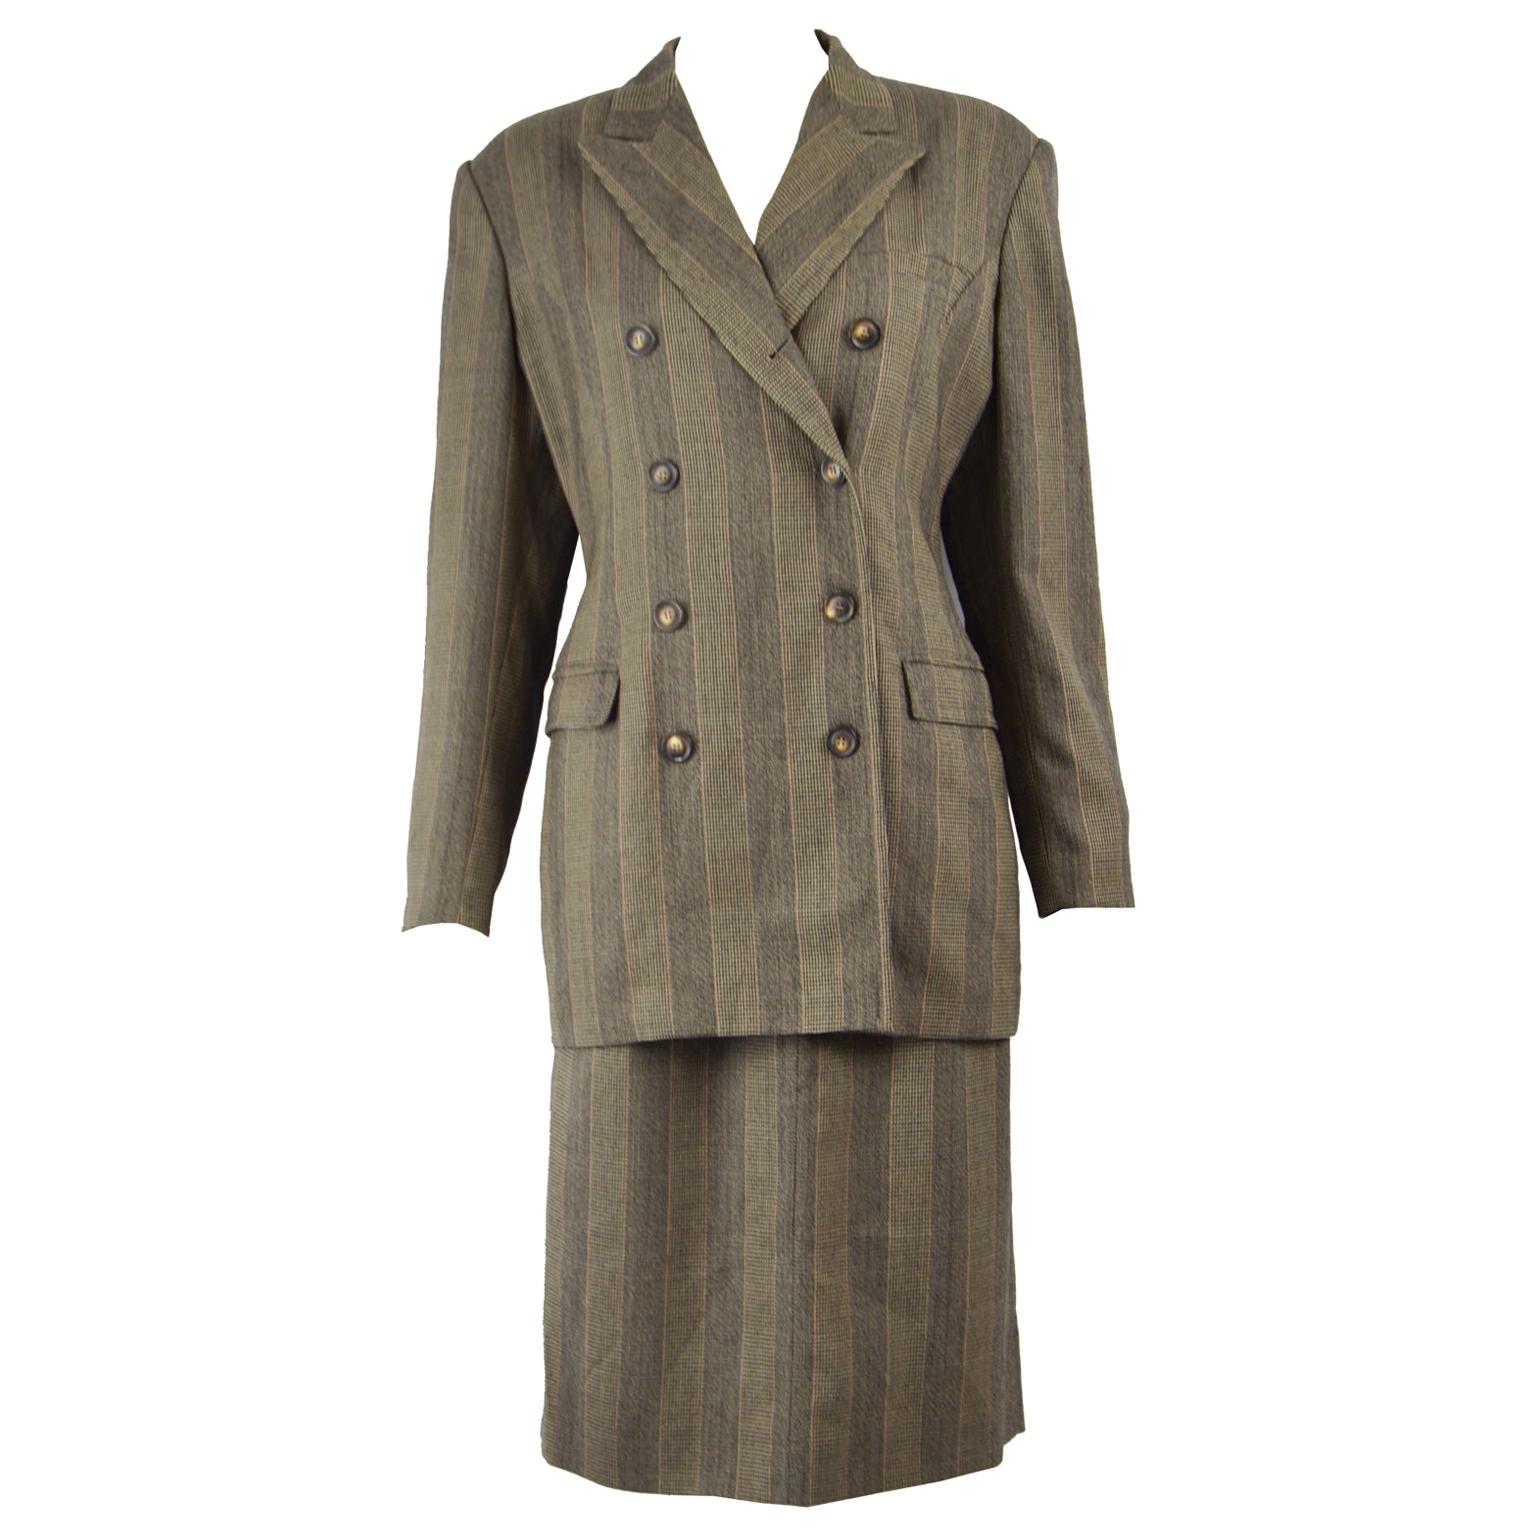 Jil Sander Pure Wool Double Breasted Tailored Women's Vintage Skirt Suit , 1990s